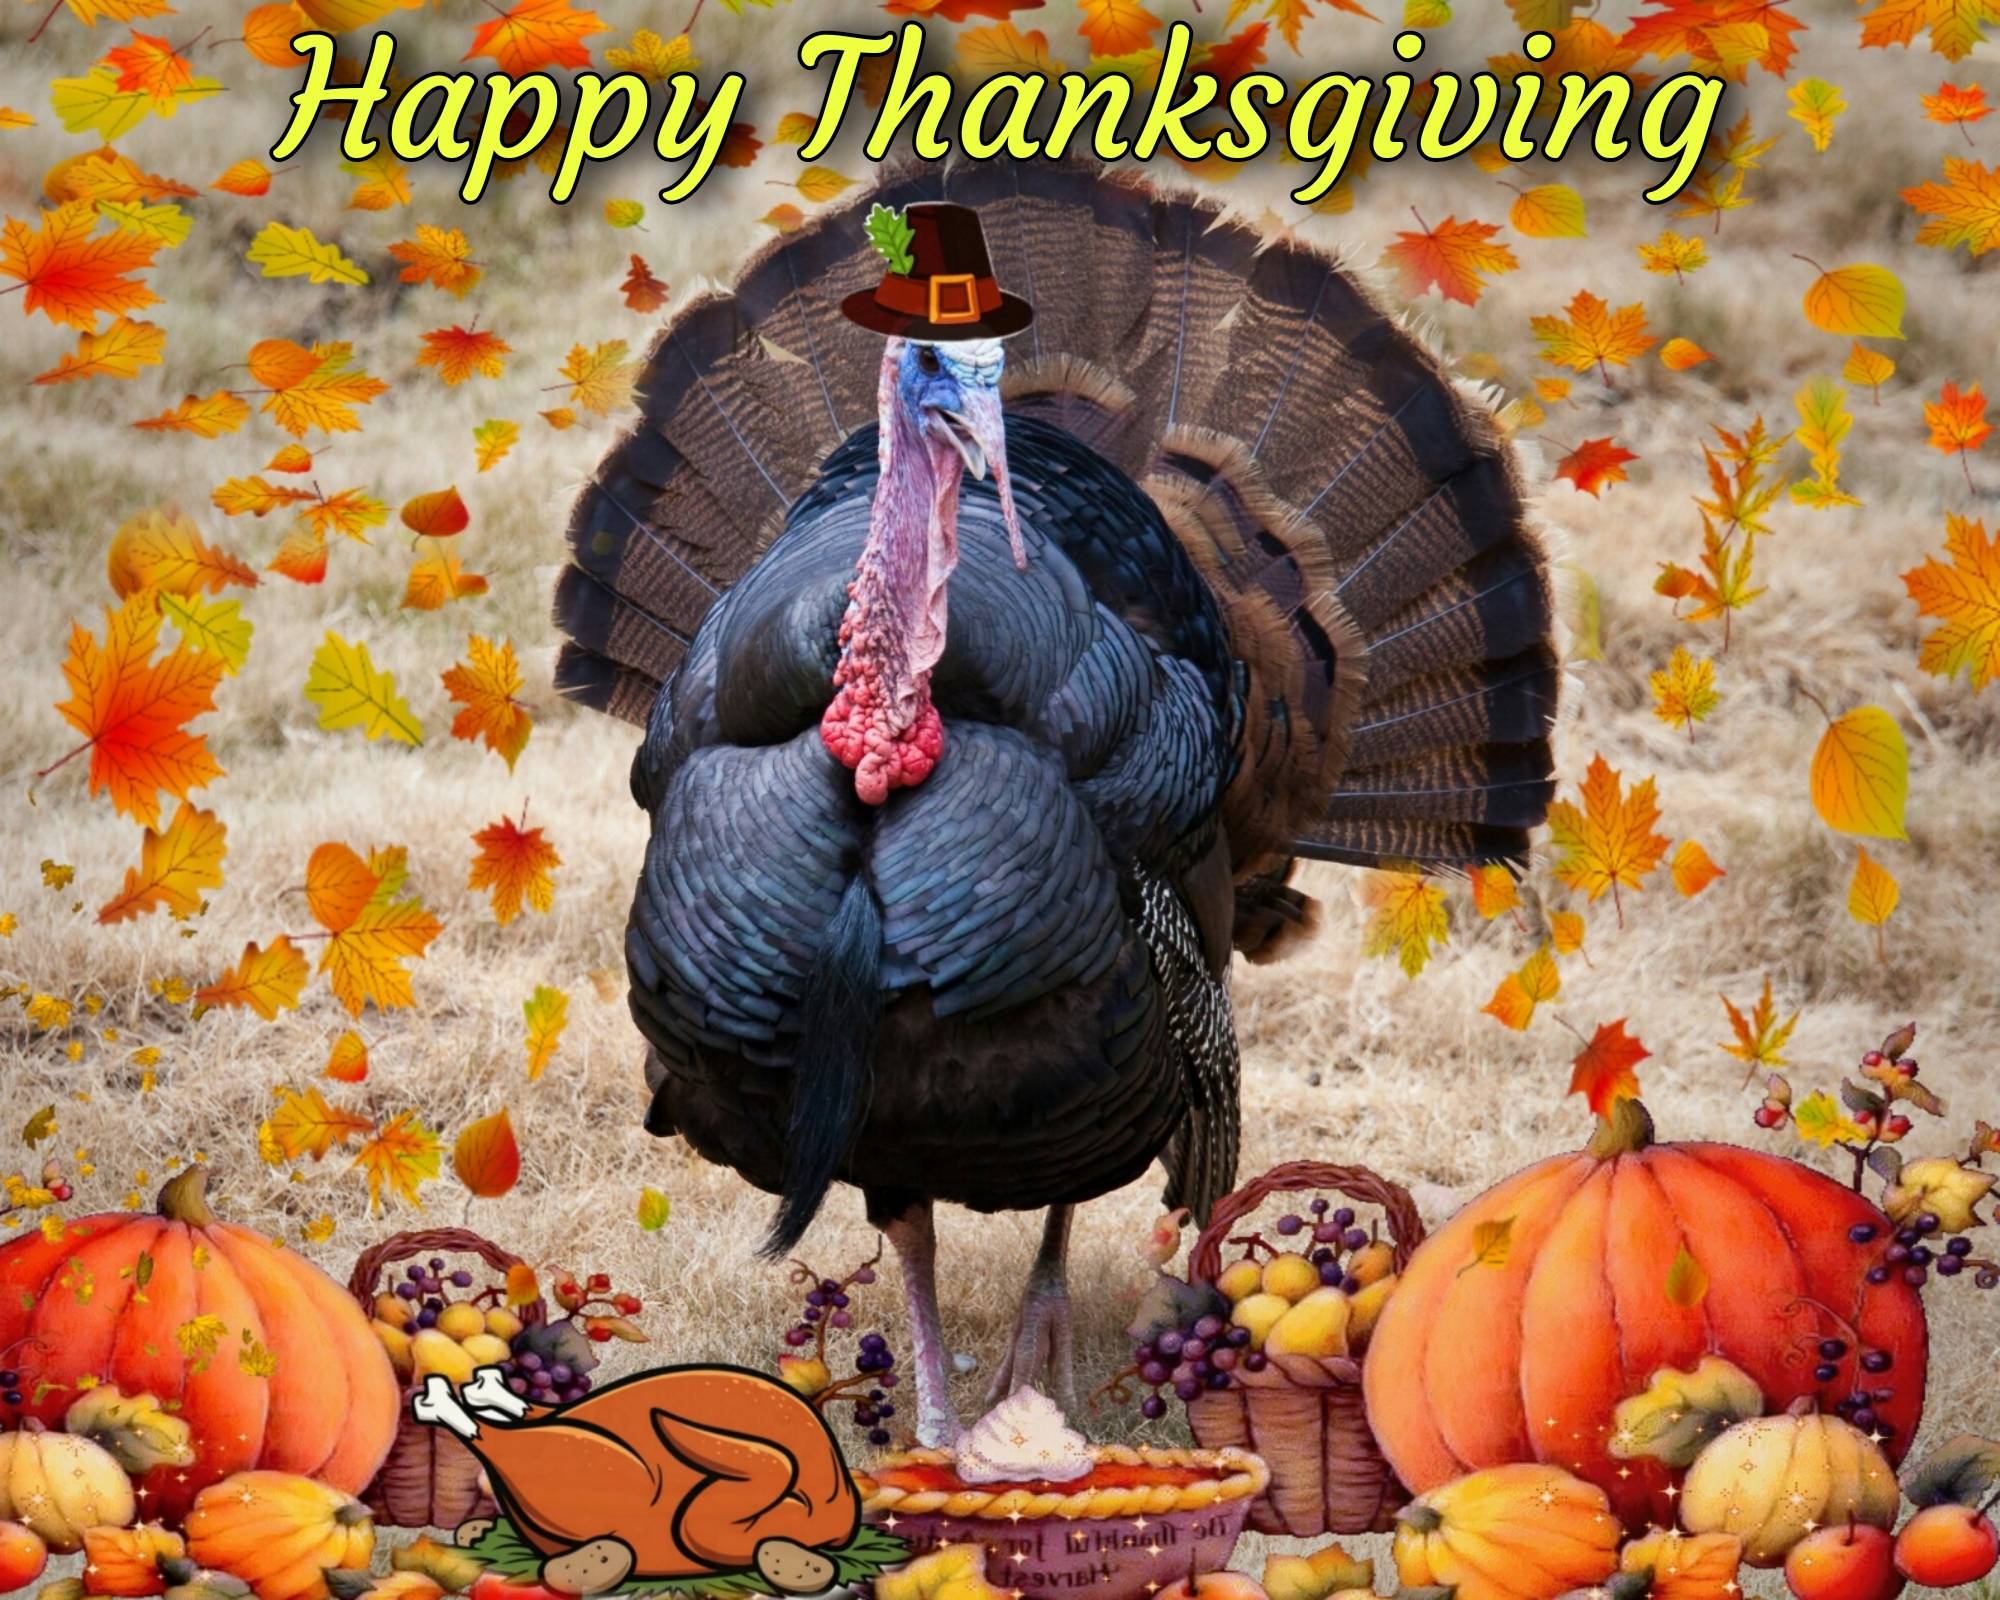 Happy Thanksgiving 2021 Free Images